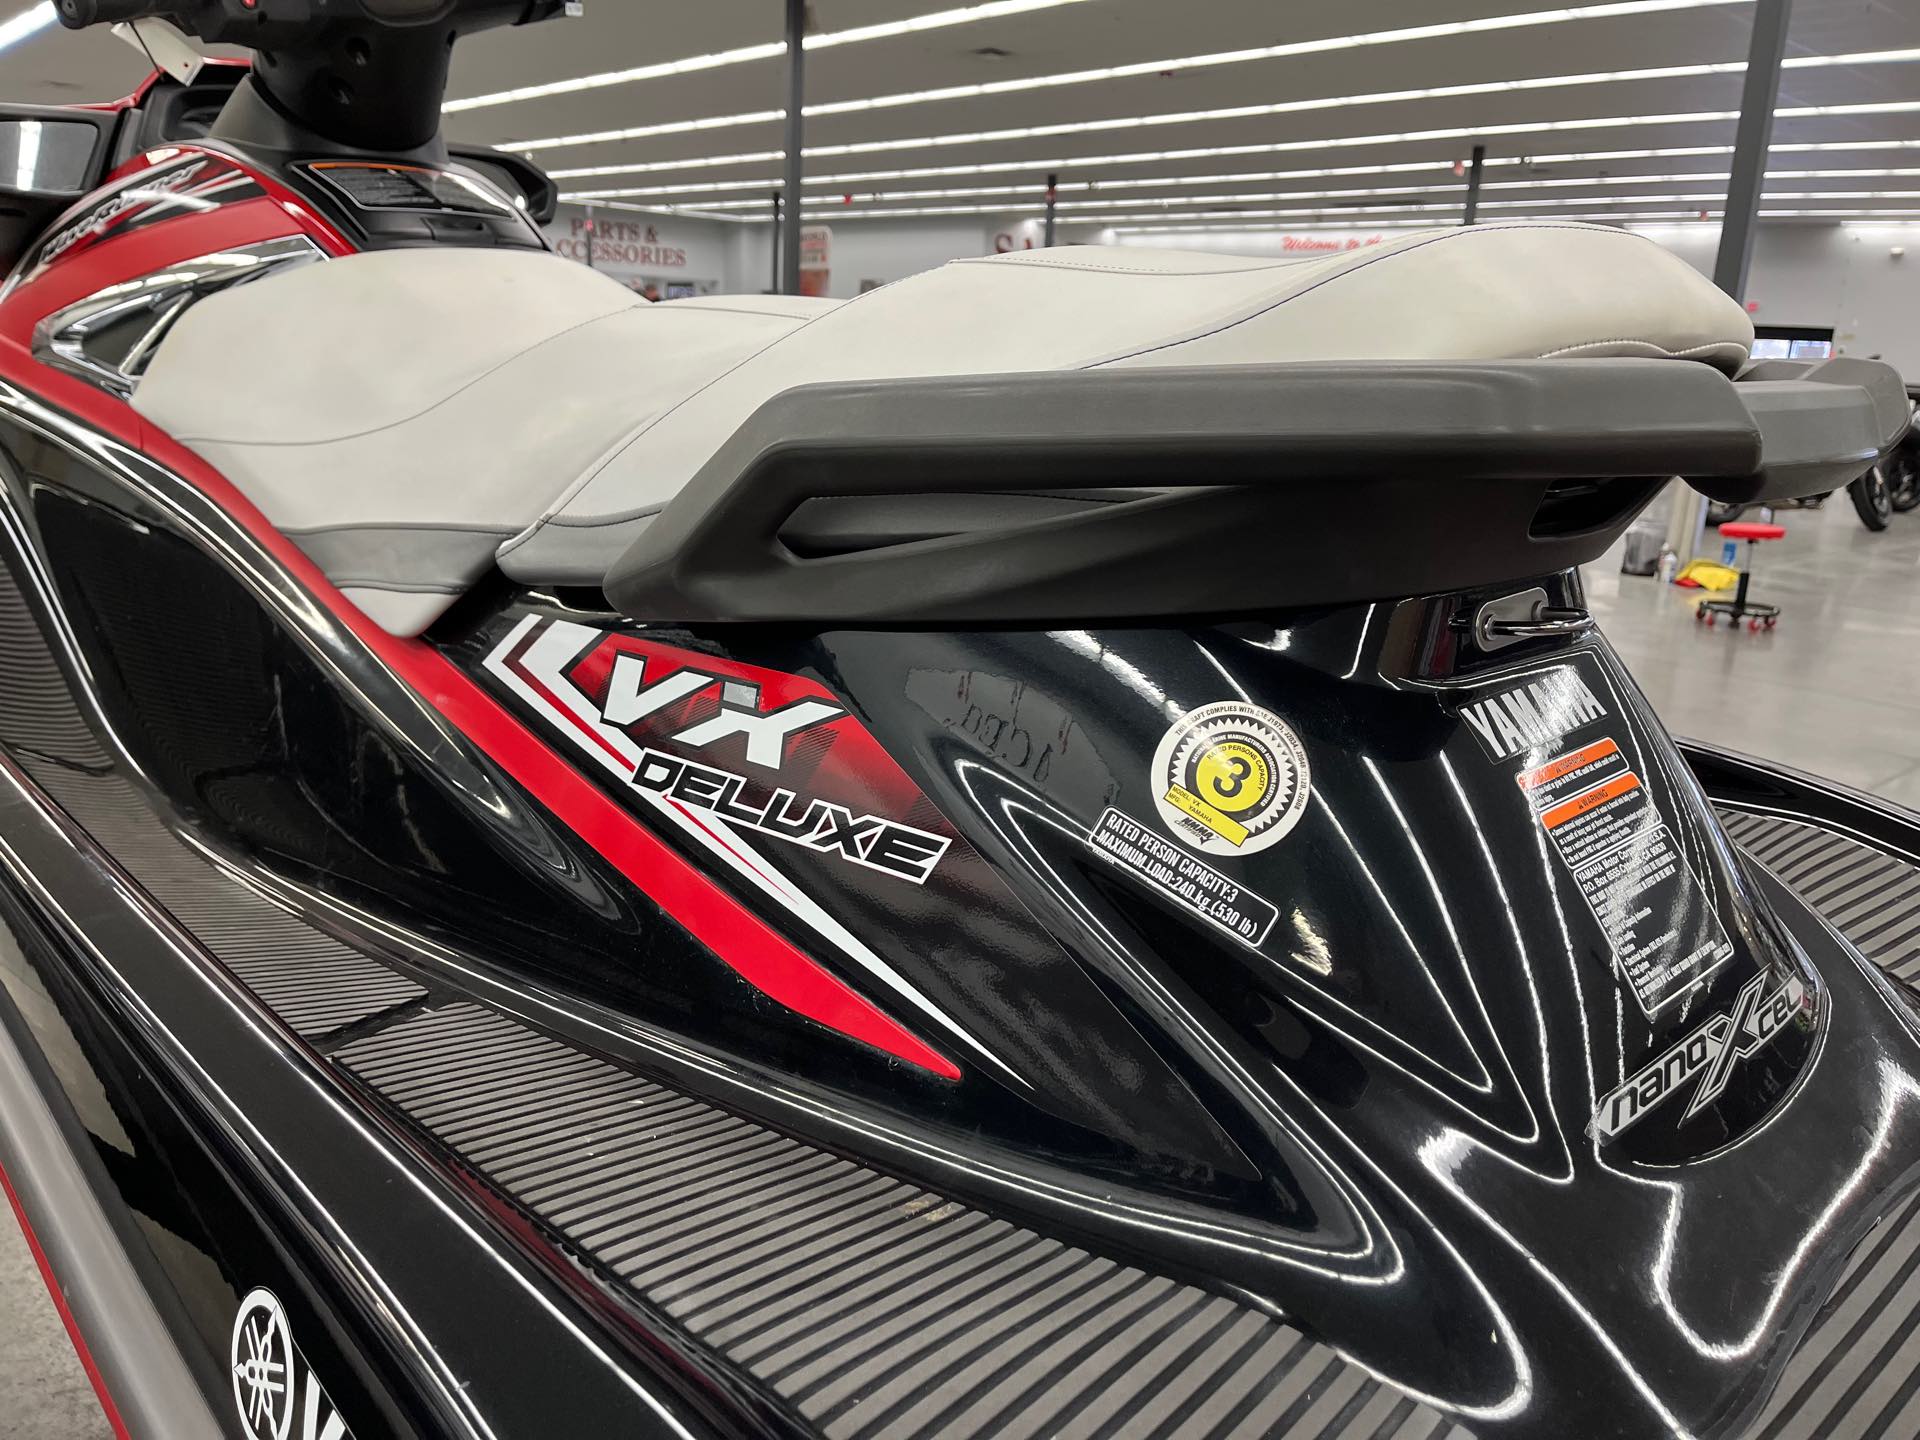 2016 YAMAHA VX DELUXE at Aces Motorcycles - Denver